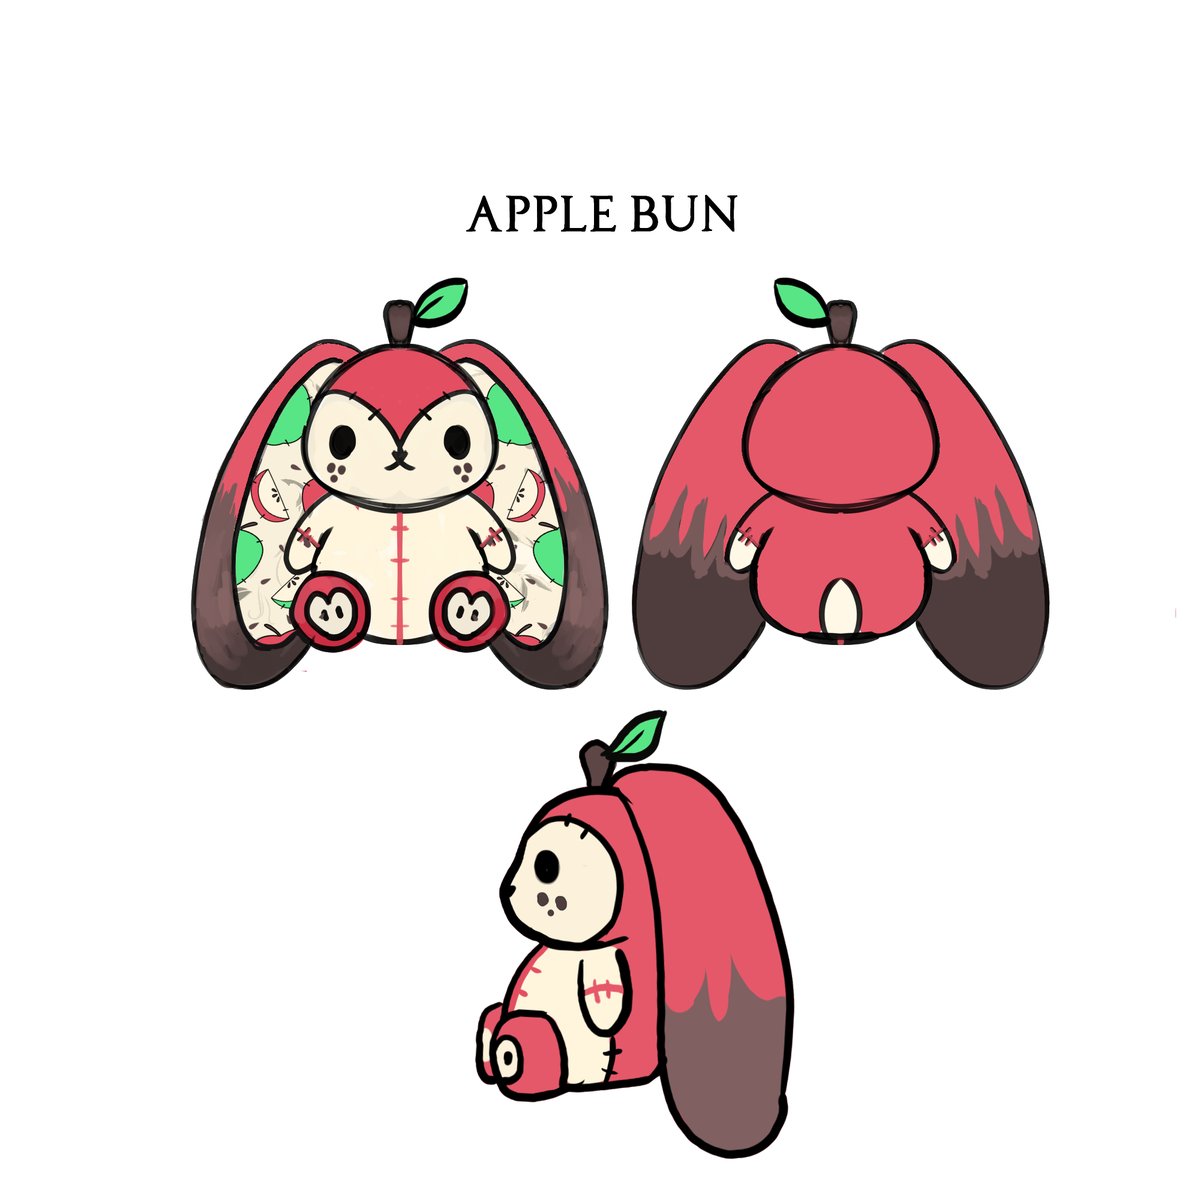 and then there was APPLE BUN